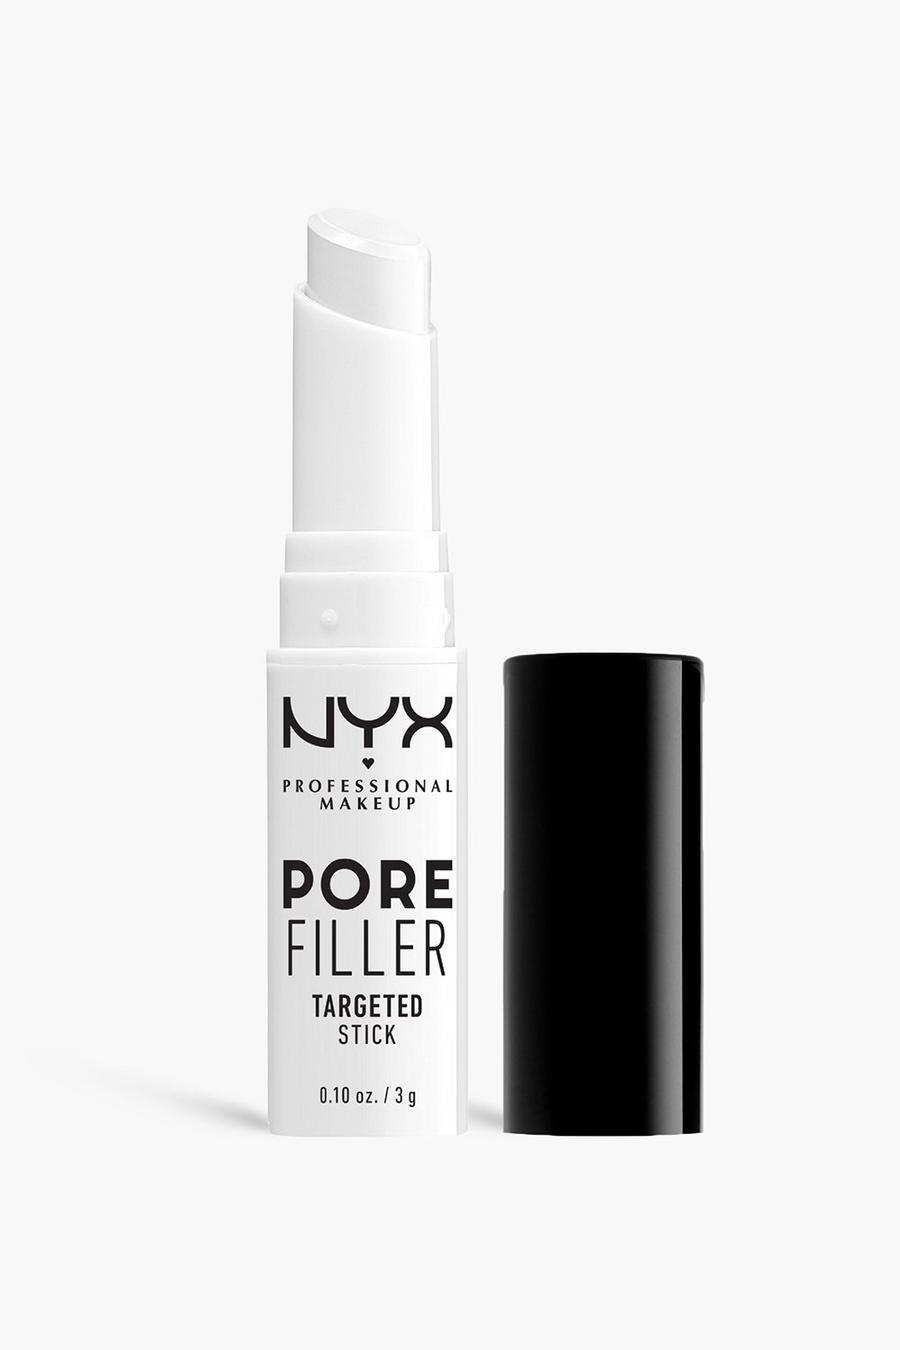 Clear NYX Professional Makeup Blurring Vitamin E Infused Pore Filler Face Primer